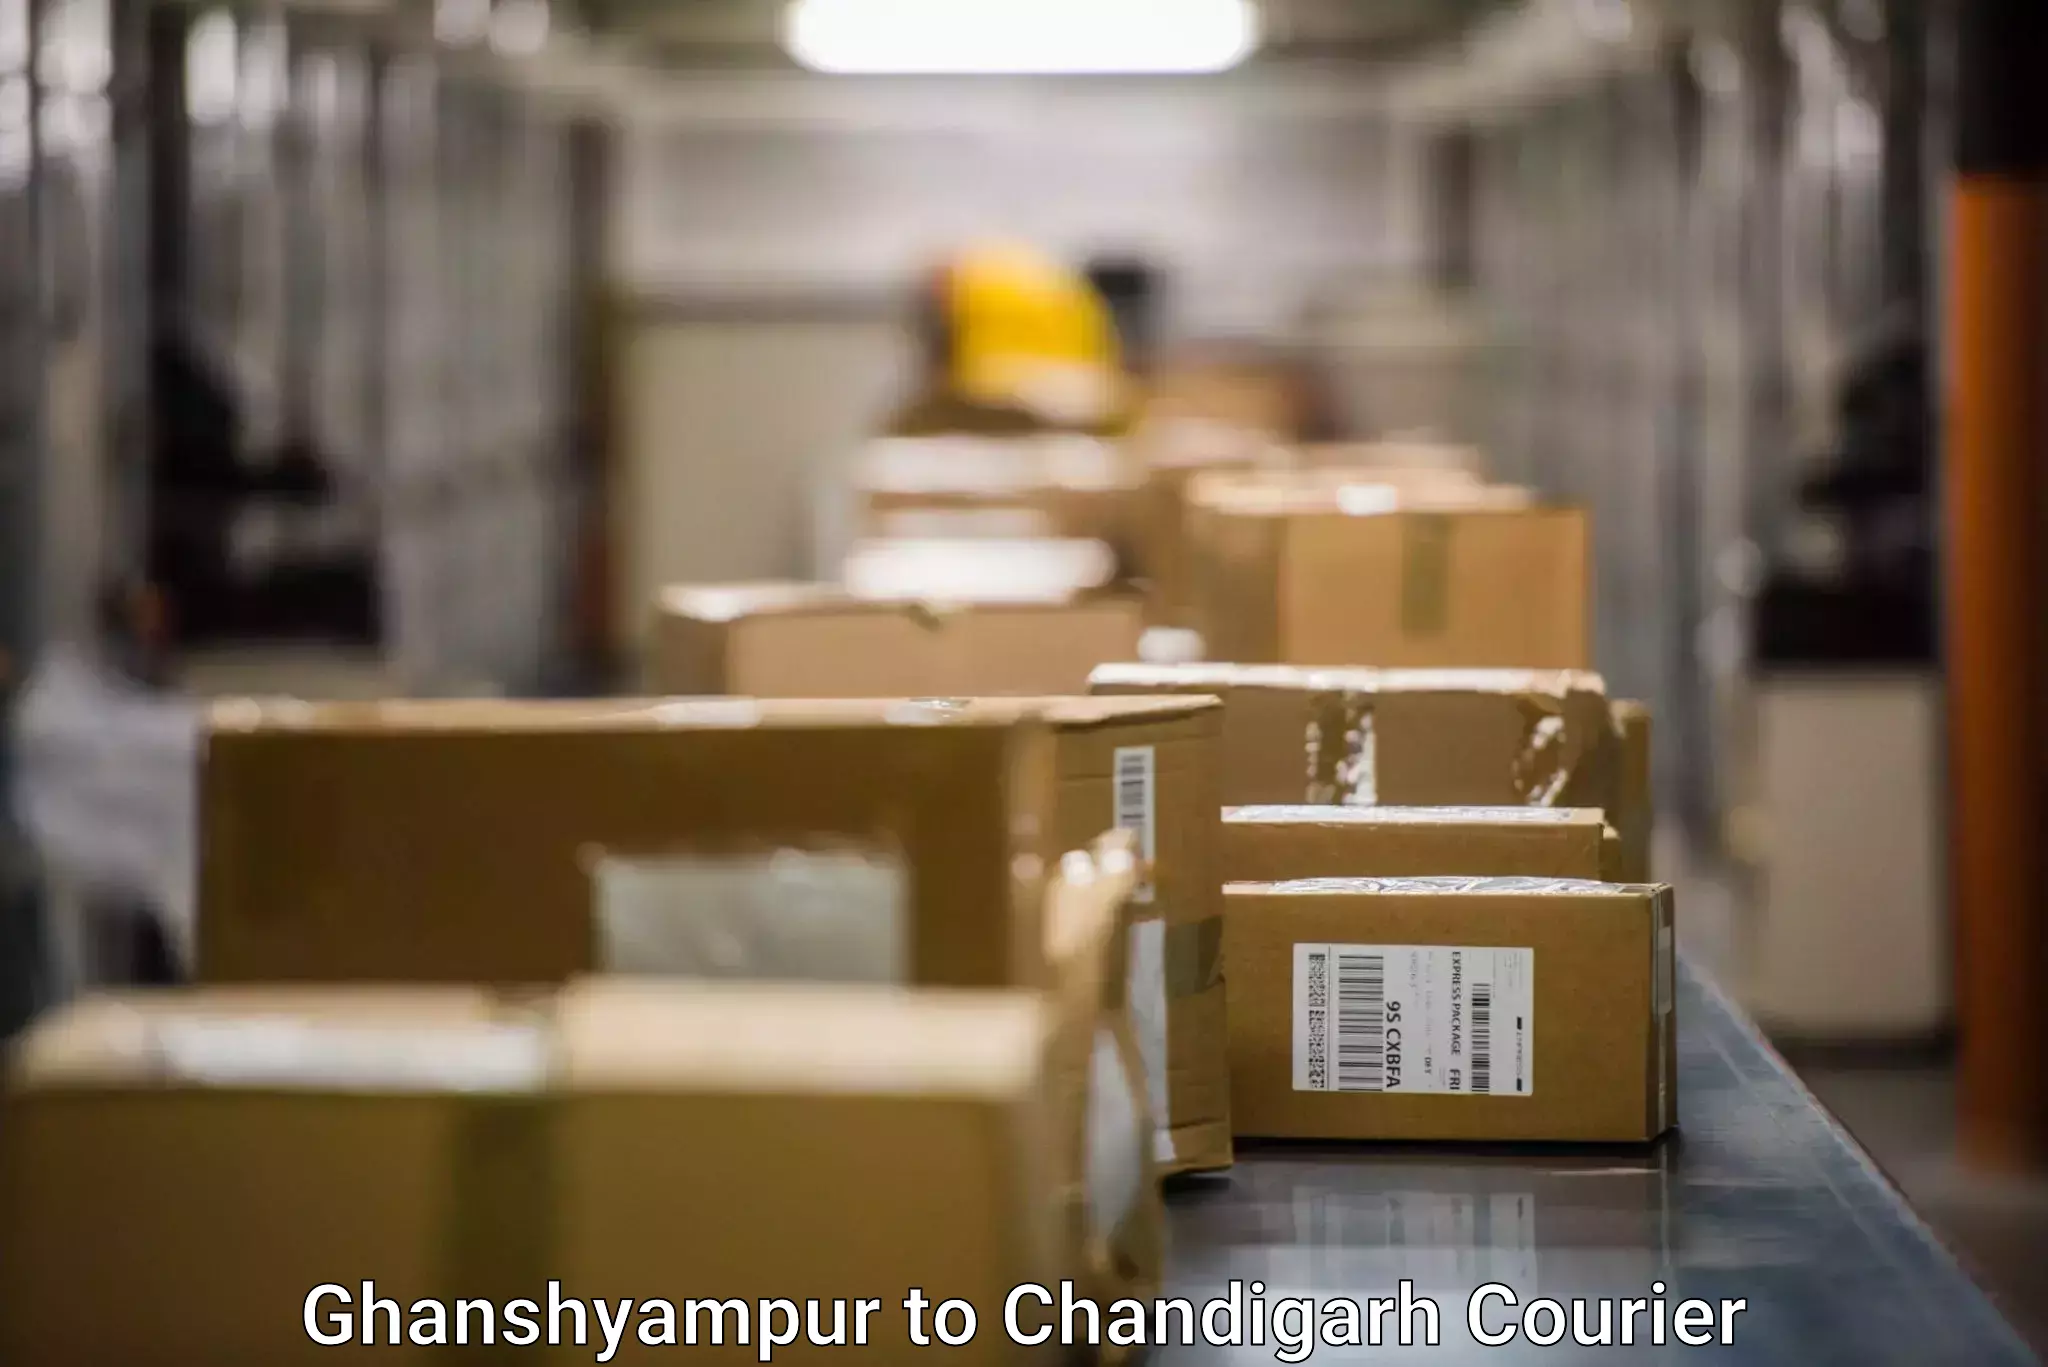 Business delivery service Ghanshyampur to Panjab University Chandigarh